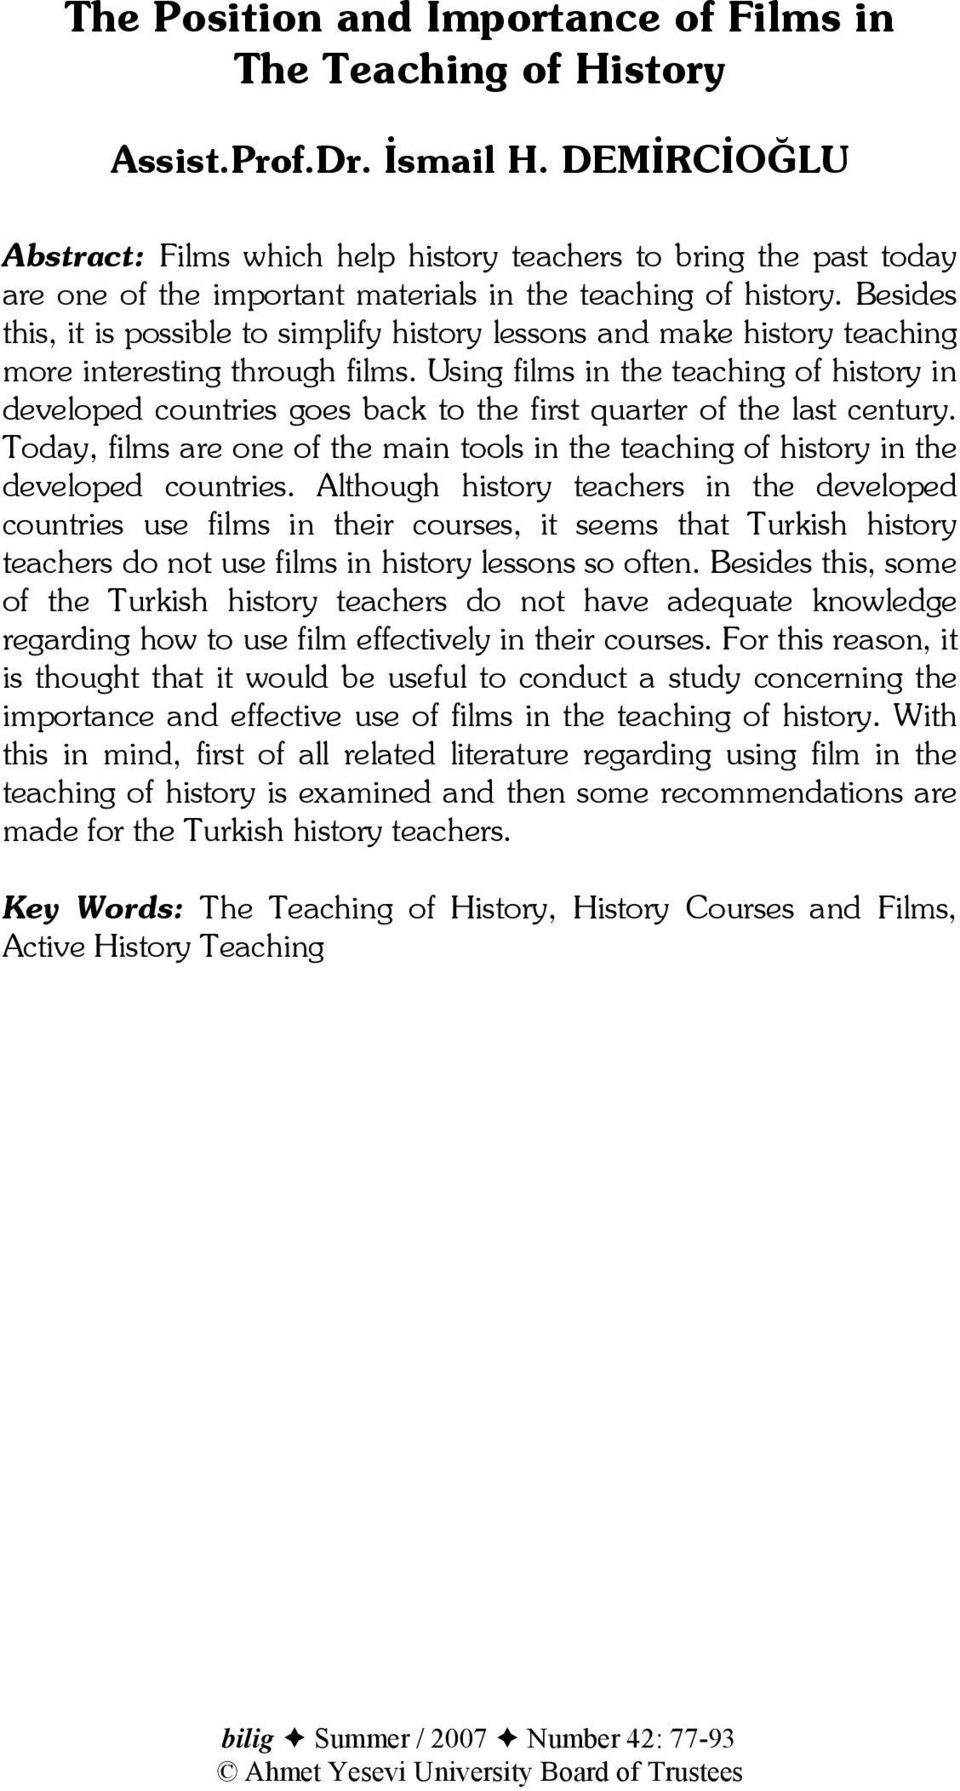 Besides this, it is possible to simplify history lessons and make history teaching more interesting through films.